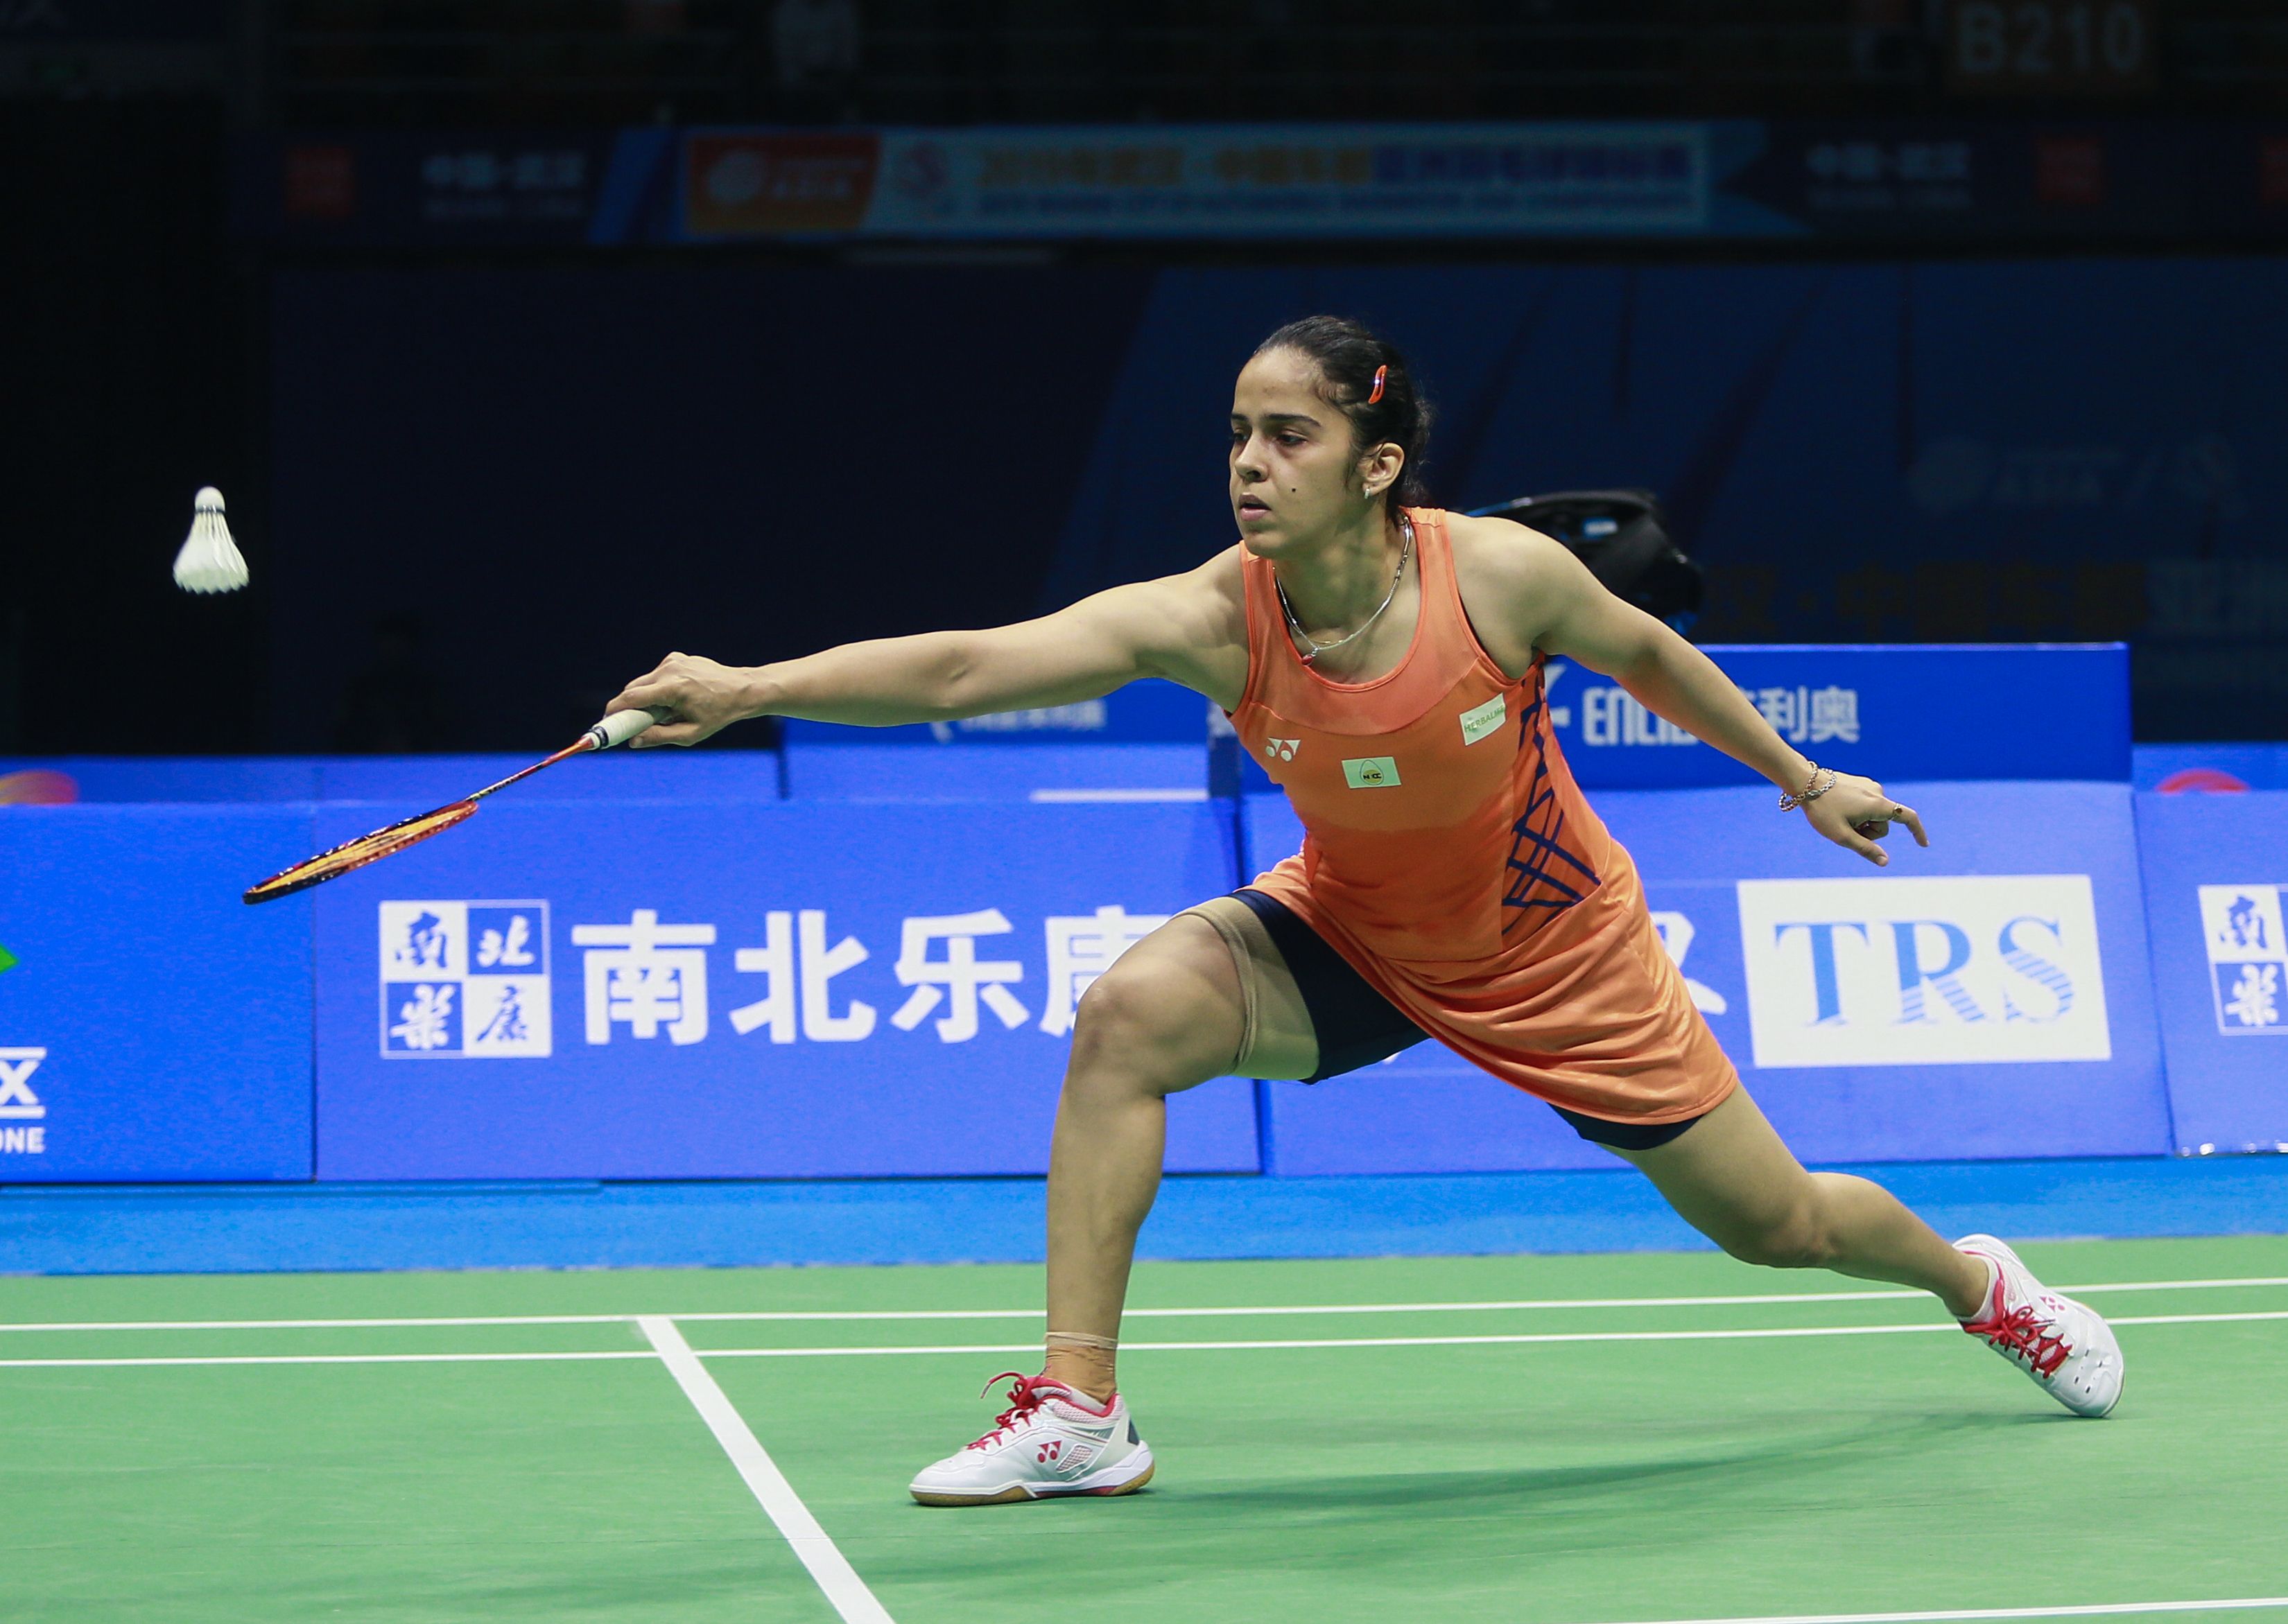 Thomas and Uber Cup 2021: Men in with chance to qualify for playoffs, women rely heavily on Saina Nehwal